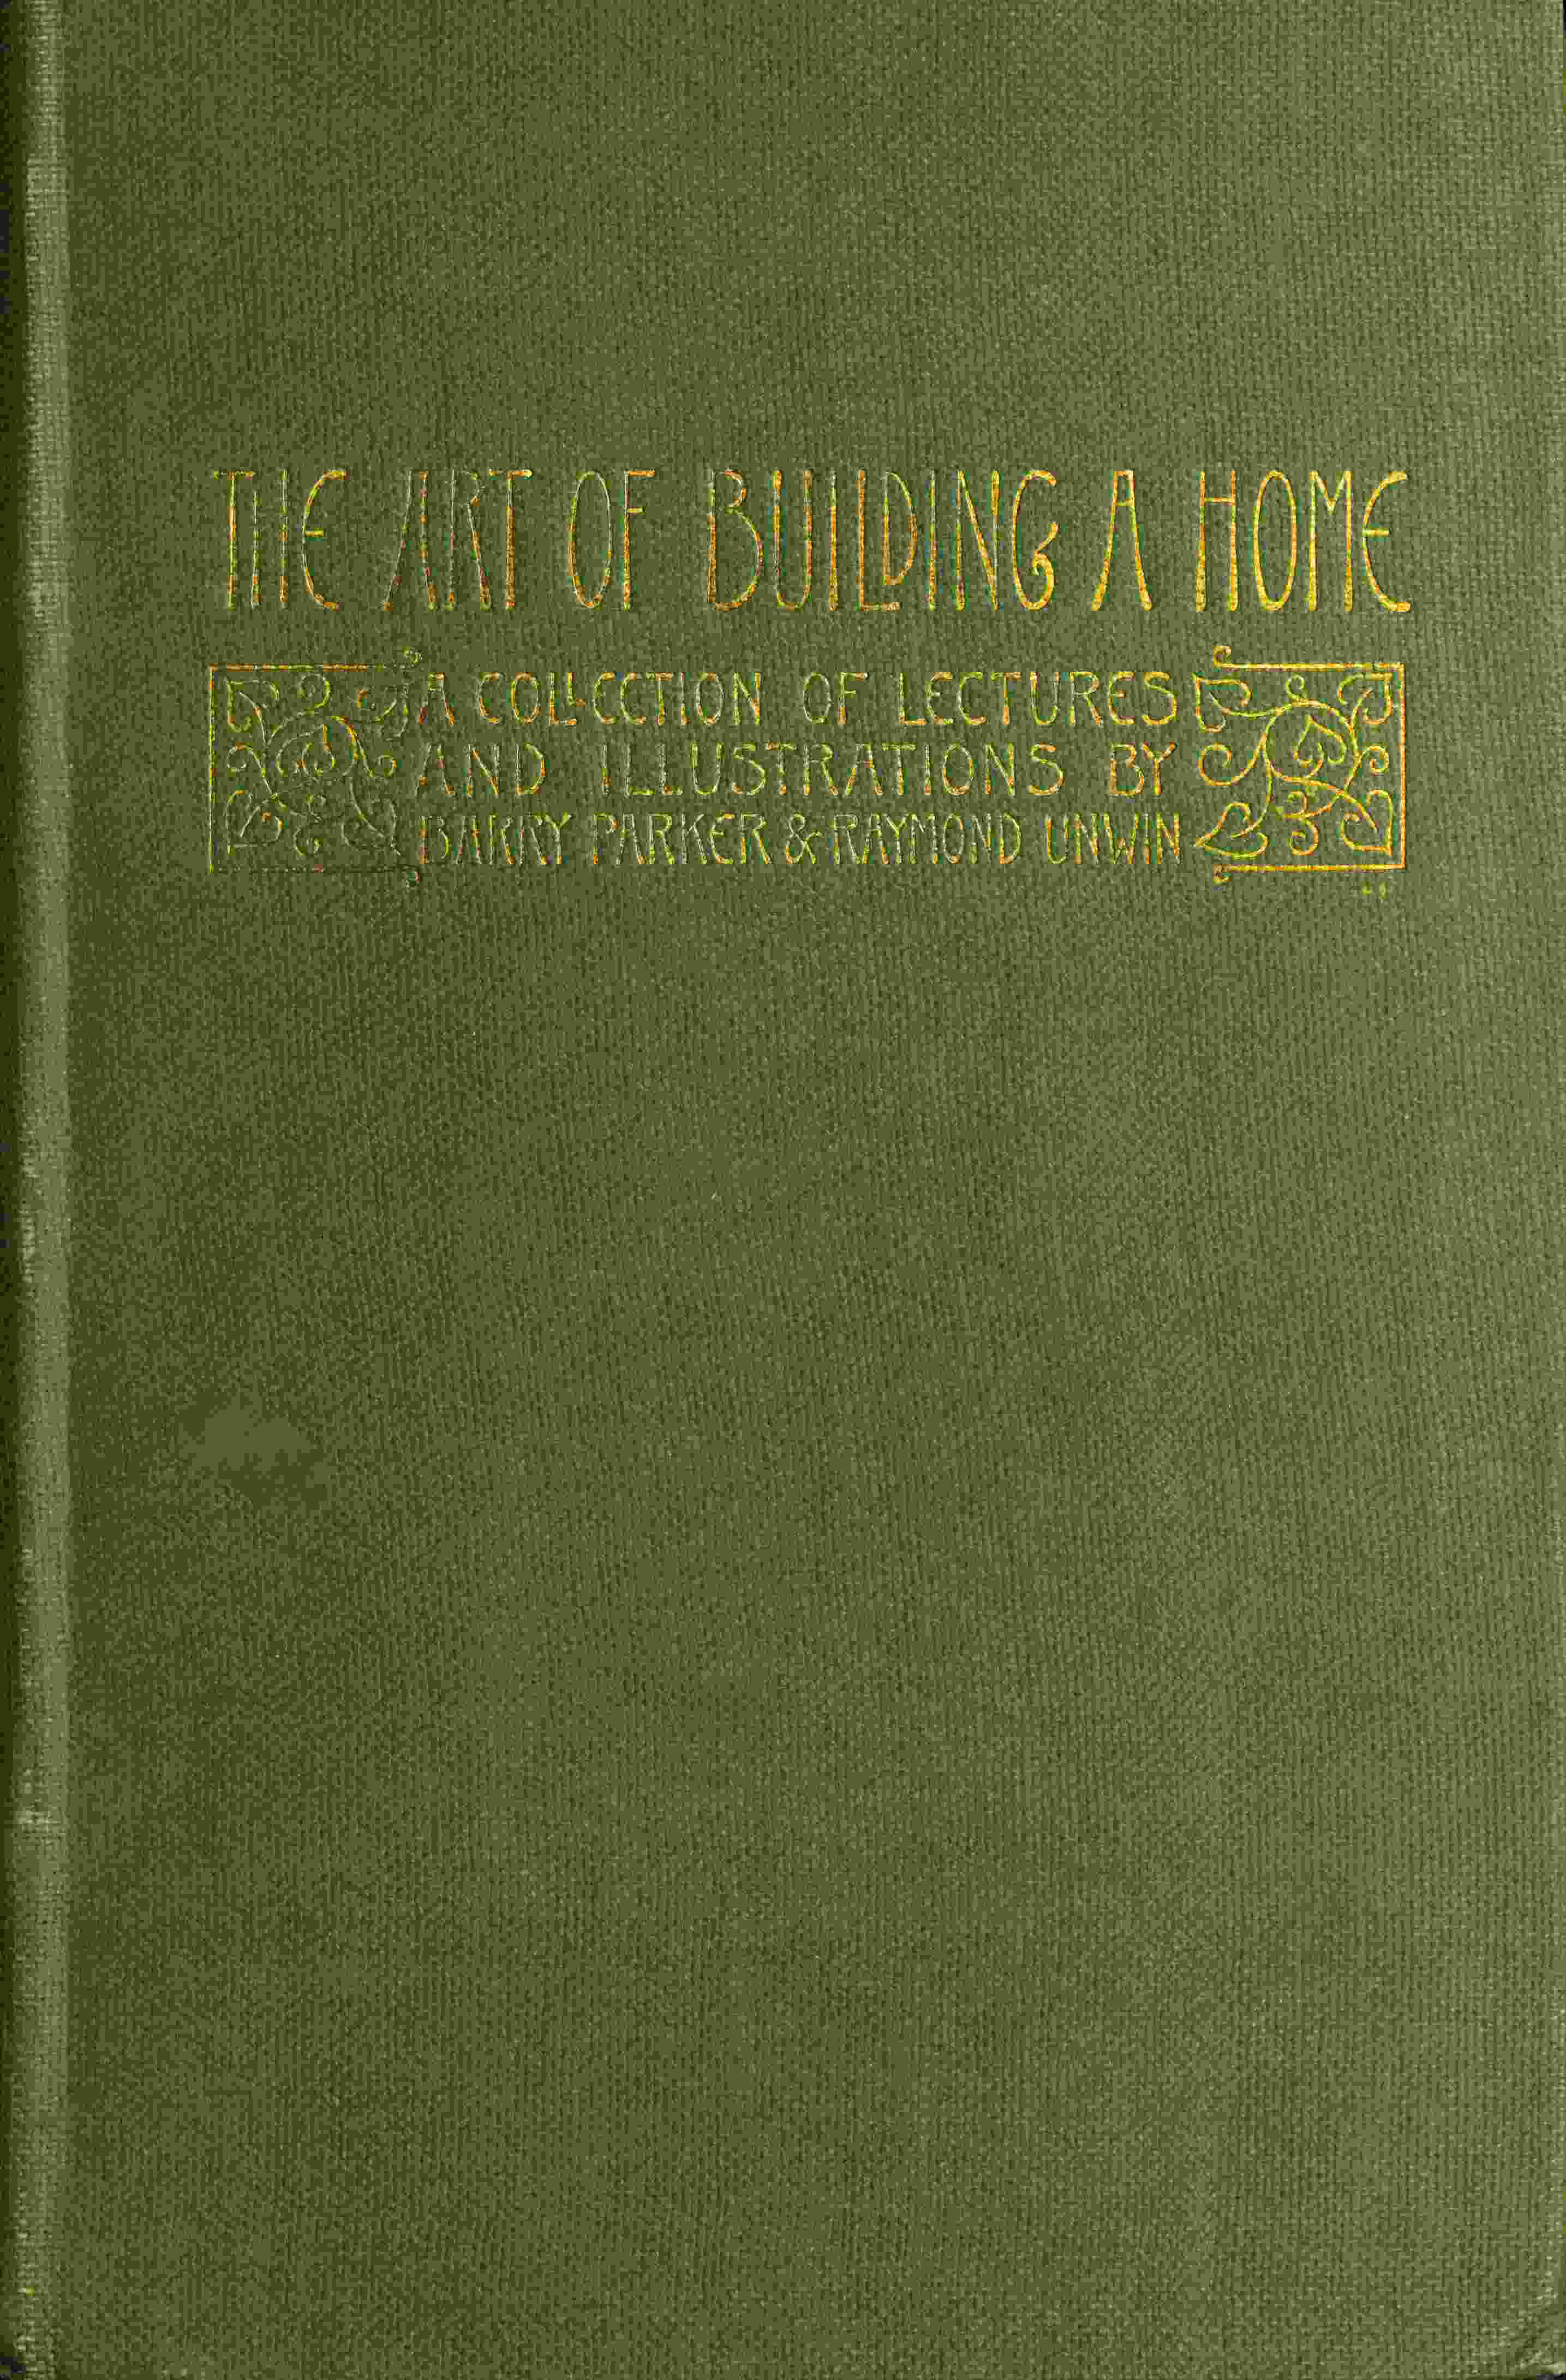 The Art of Building a Home: A collection of lectures and illustrations